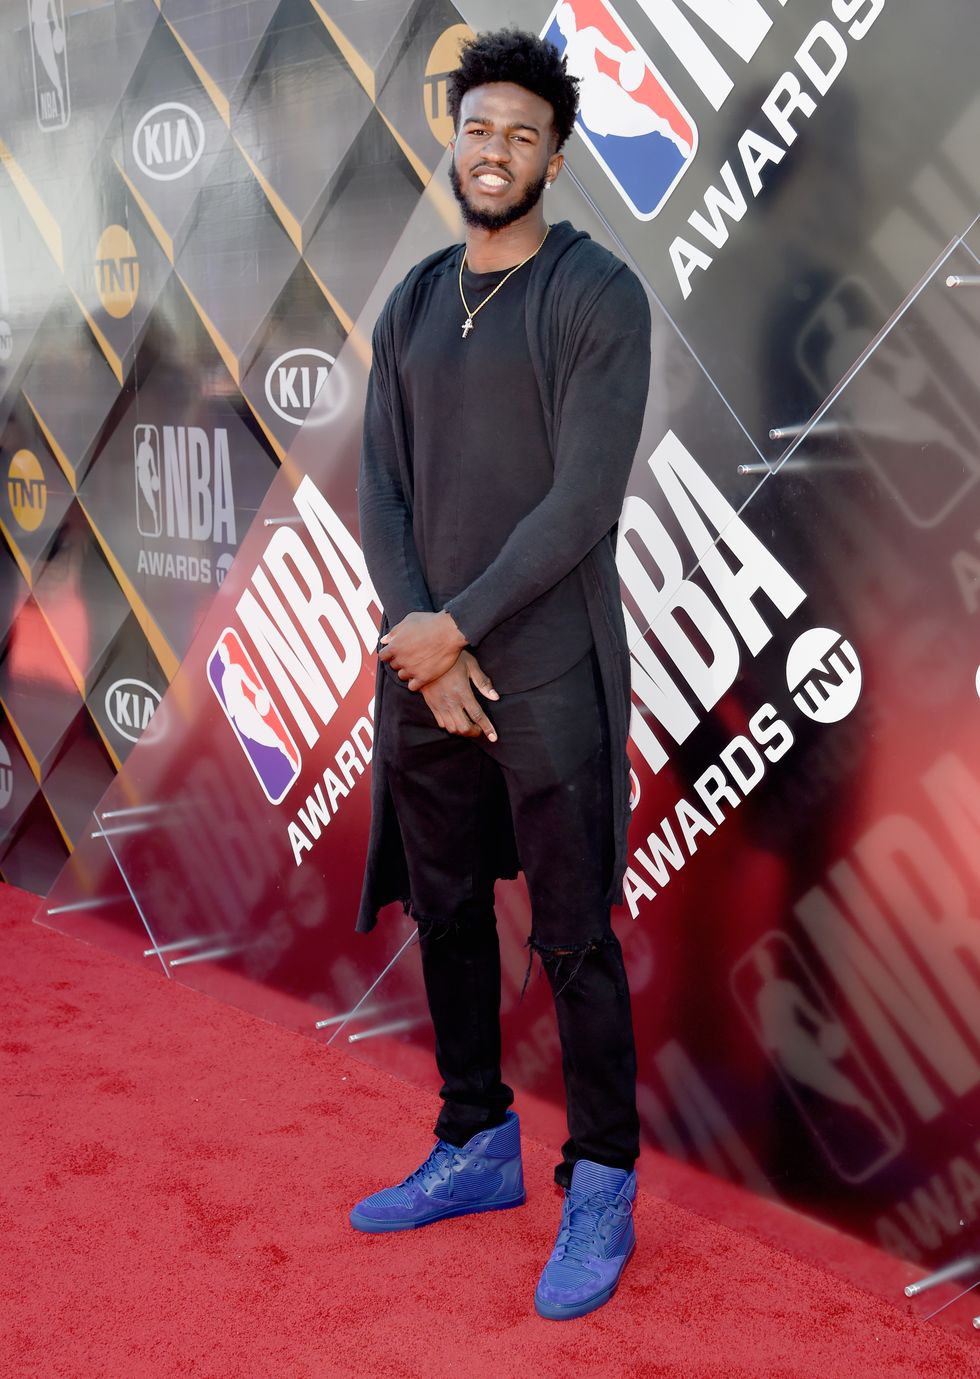 The Best (and Most Completely Over-the-Top) Looks From the NBA Awards